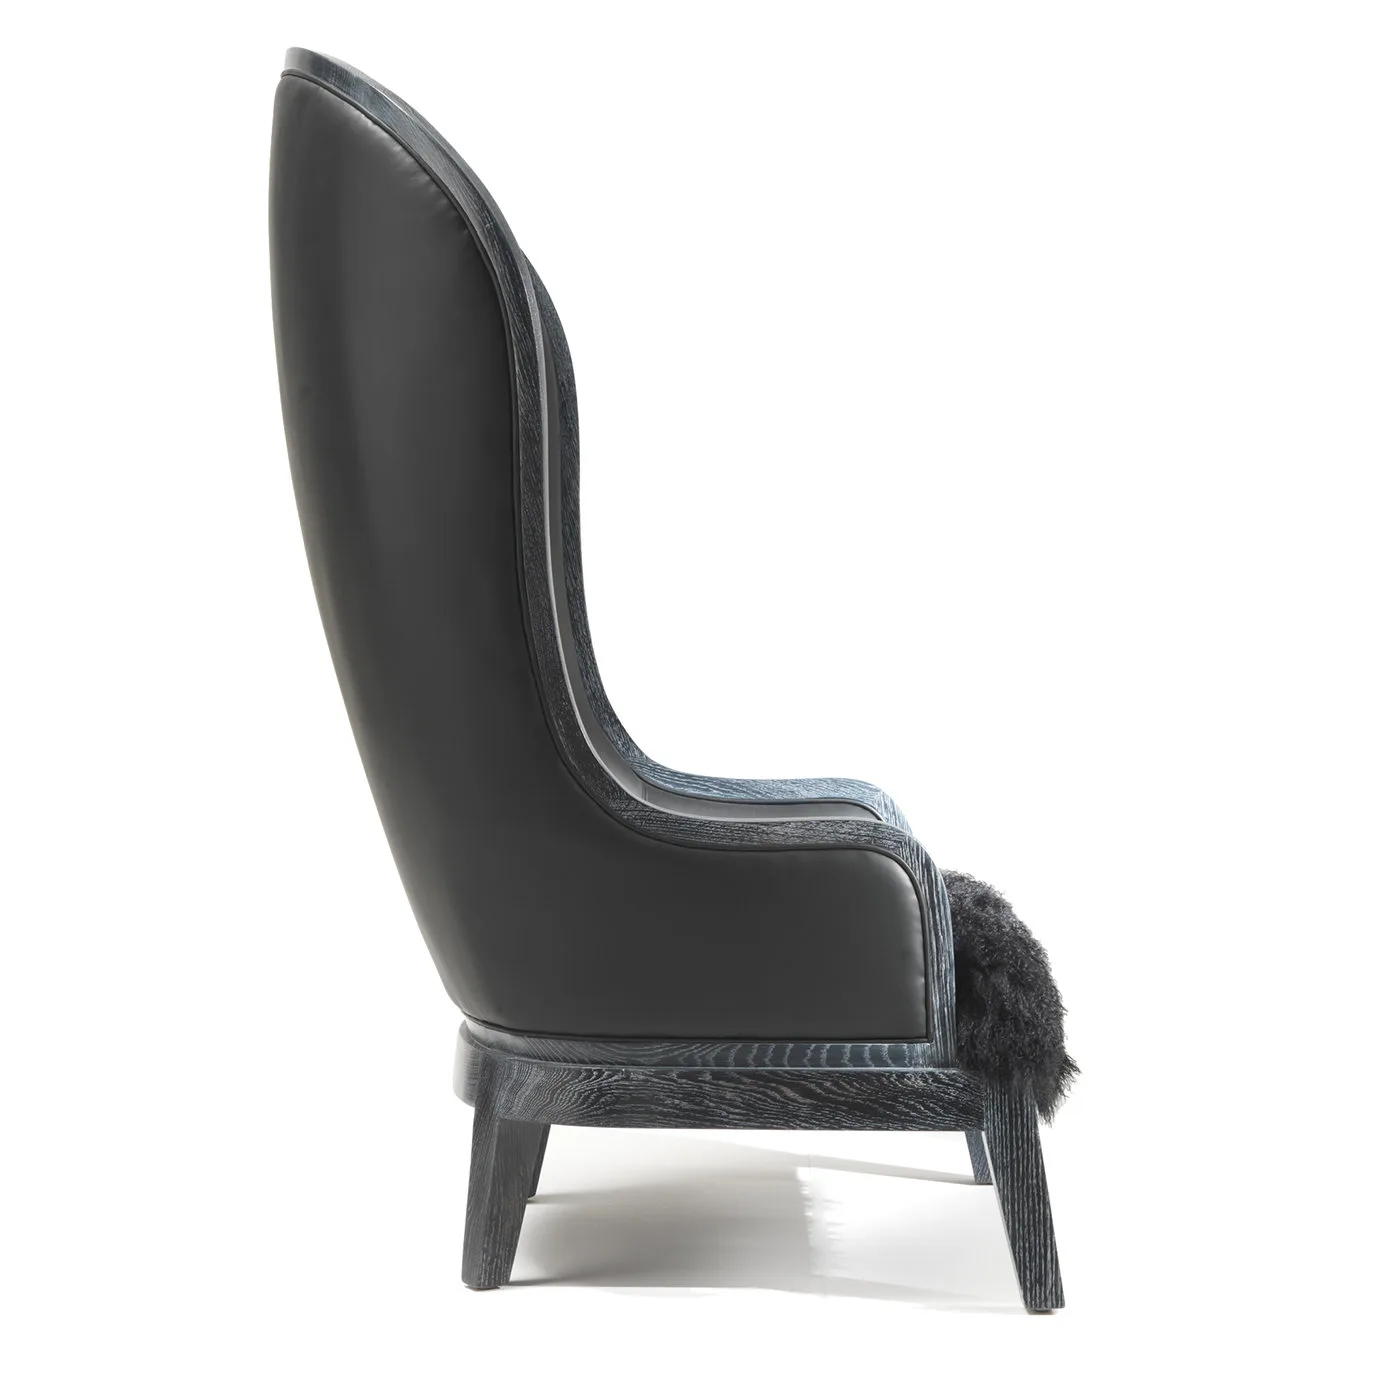 DUCHESSE OF HOME ARMCHAIR BY ARCHER HUMPHRYES ARCHITECTS